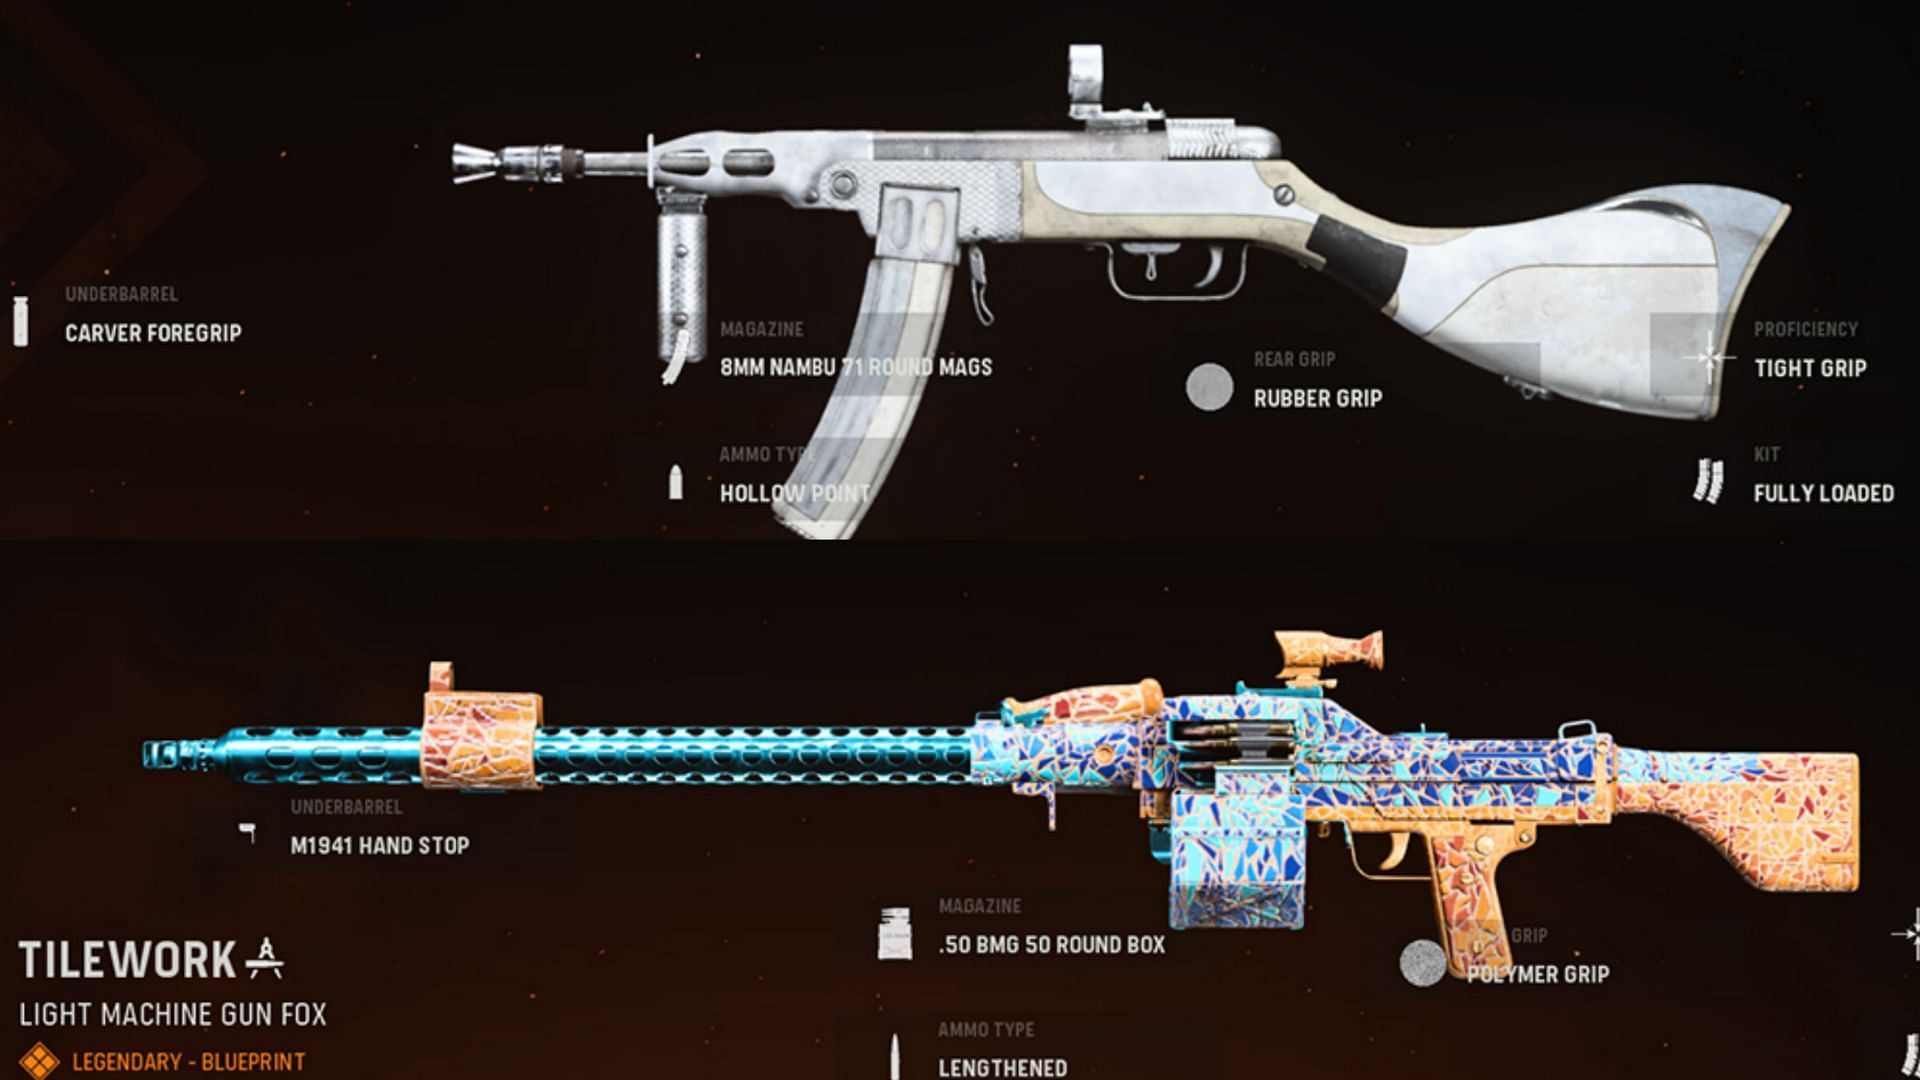 Some available blueprints for Vanguard PPSh-41 and UGM-8 in-game (Image via Warzone / Activision)